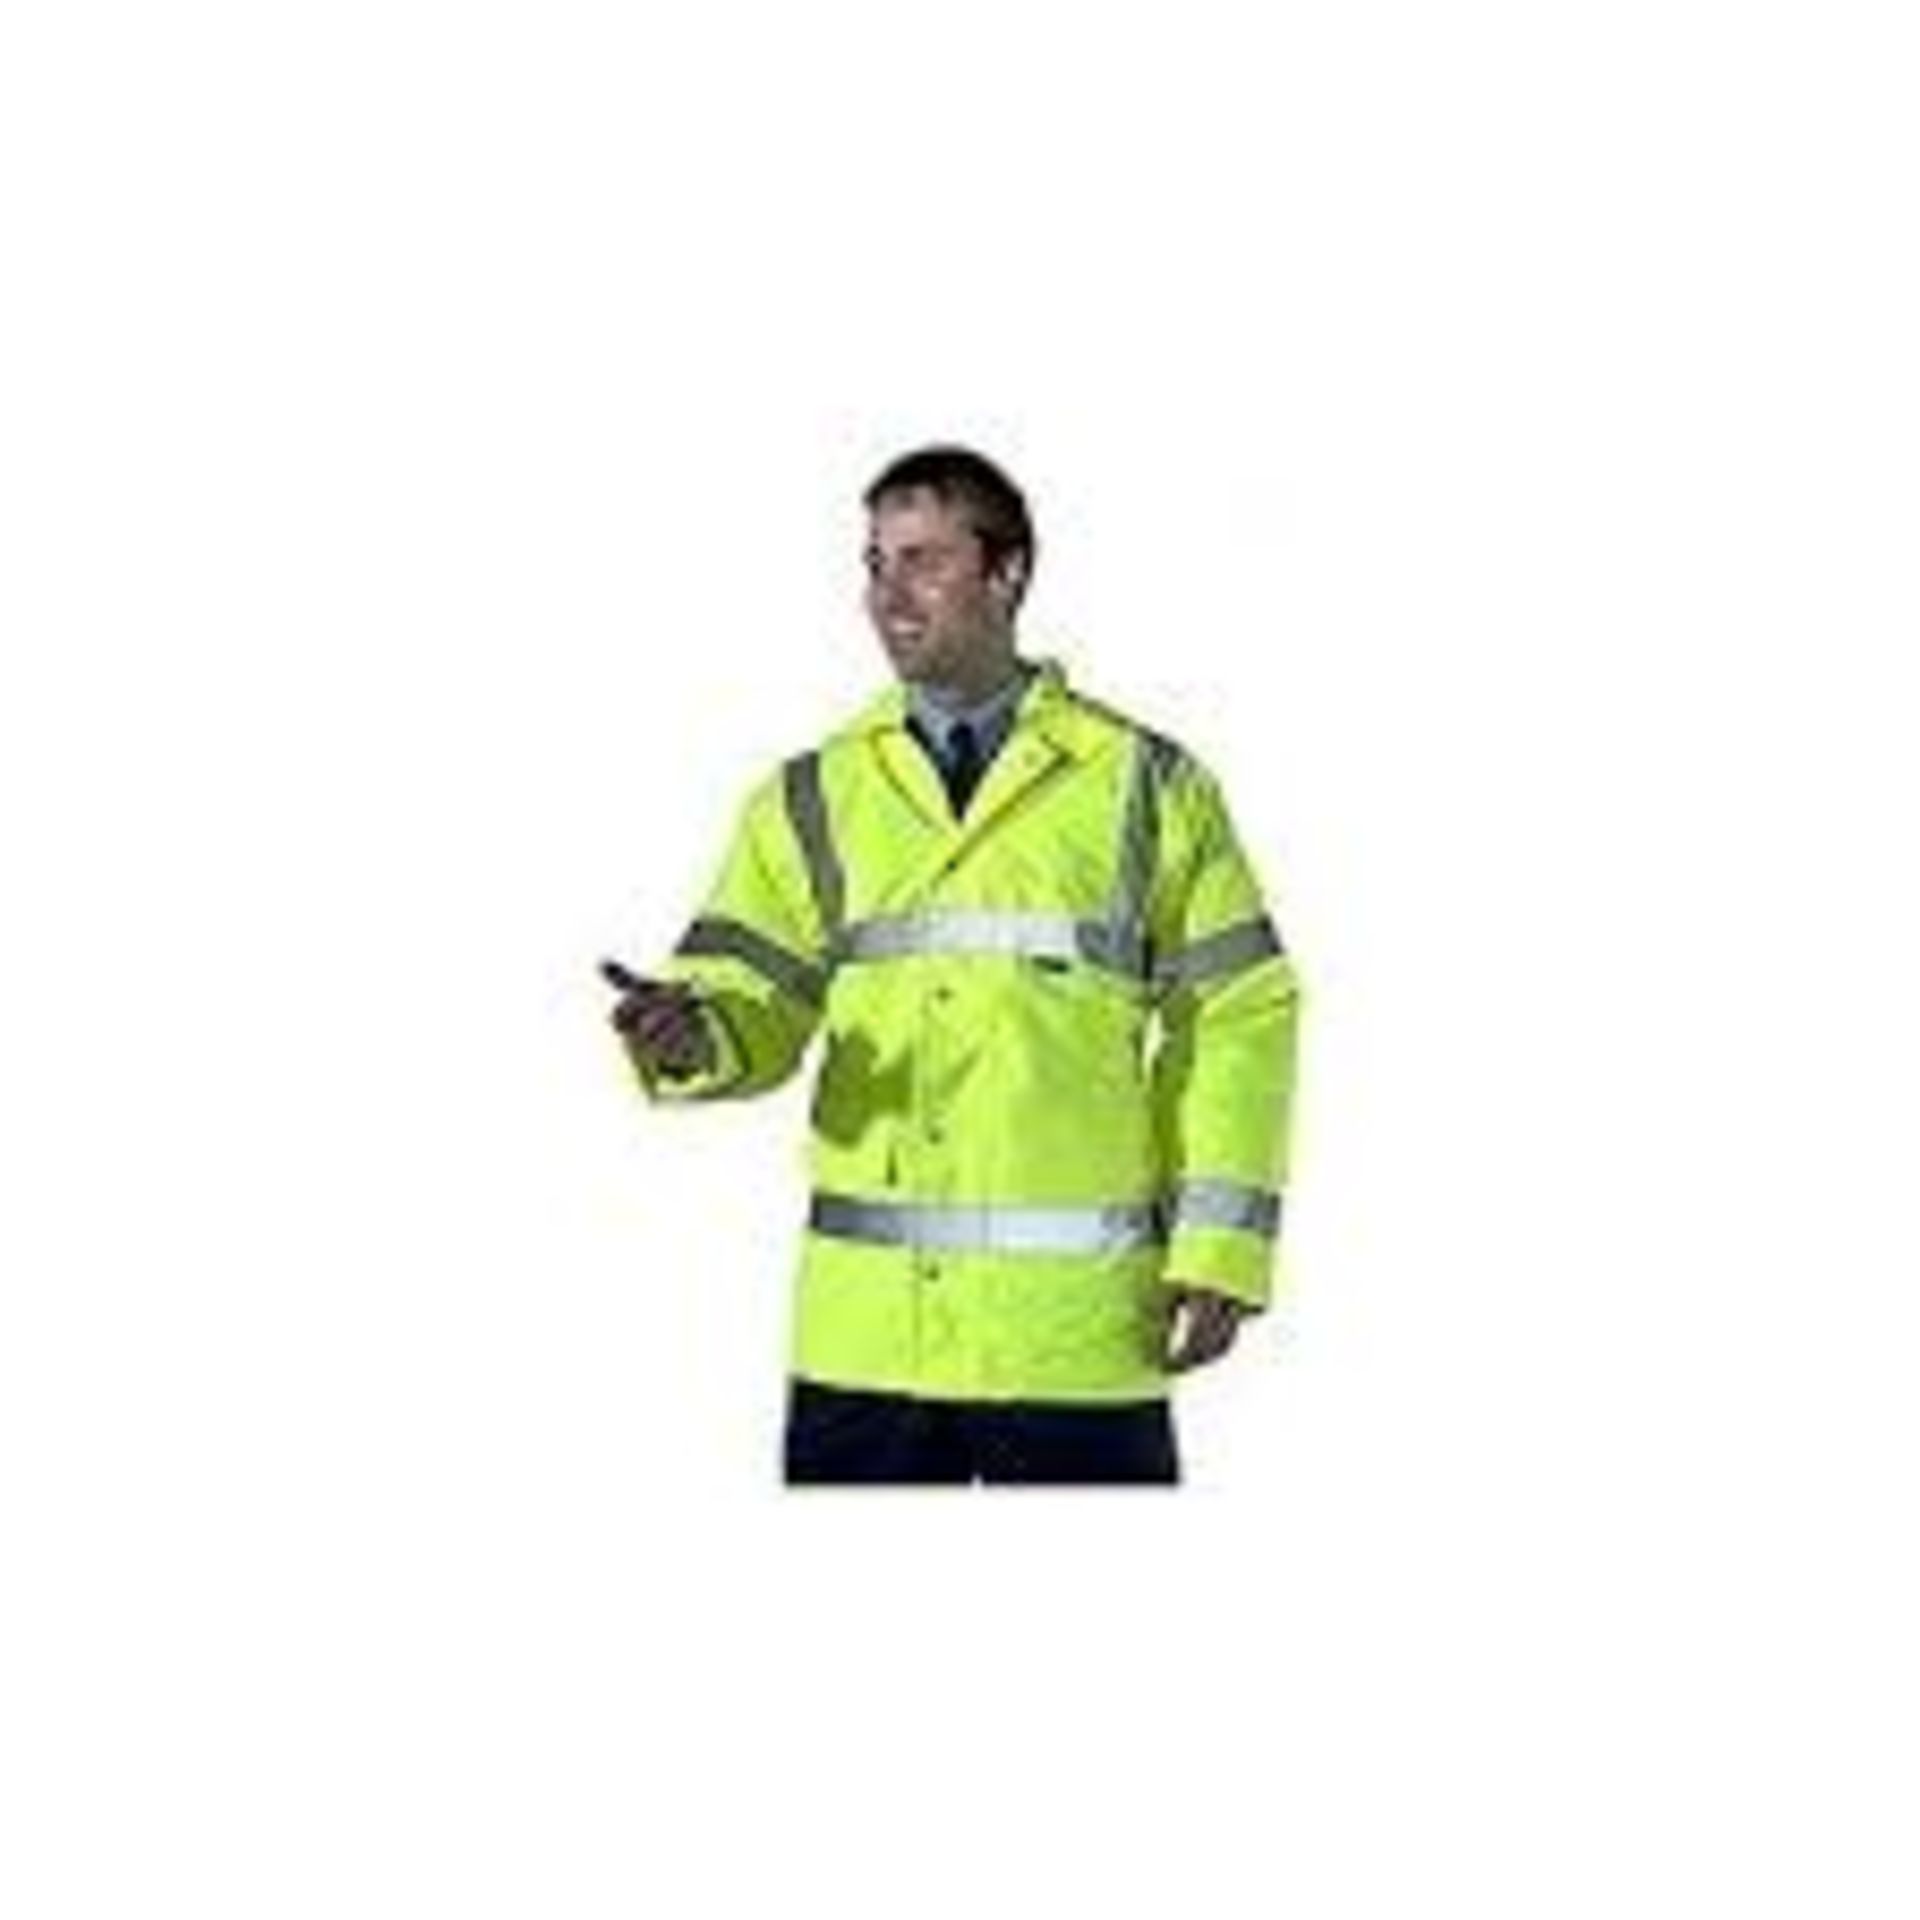 LARGE PALLET OF ASSORTED WORKWEAR STOCK. PALLETS MAY INCLUDE ITEMS SUCH AS: HI-VIZ JACKETS, HI-VIZ